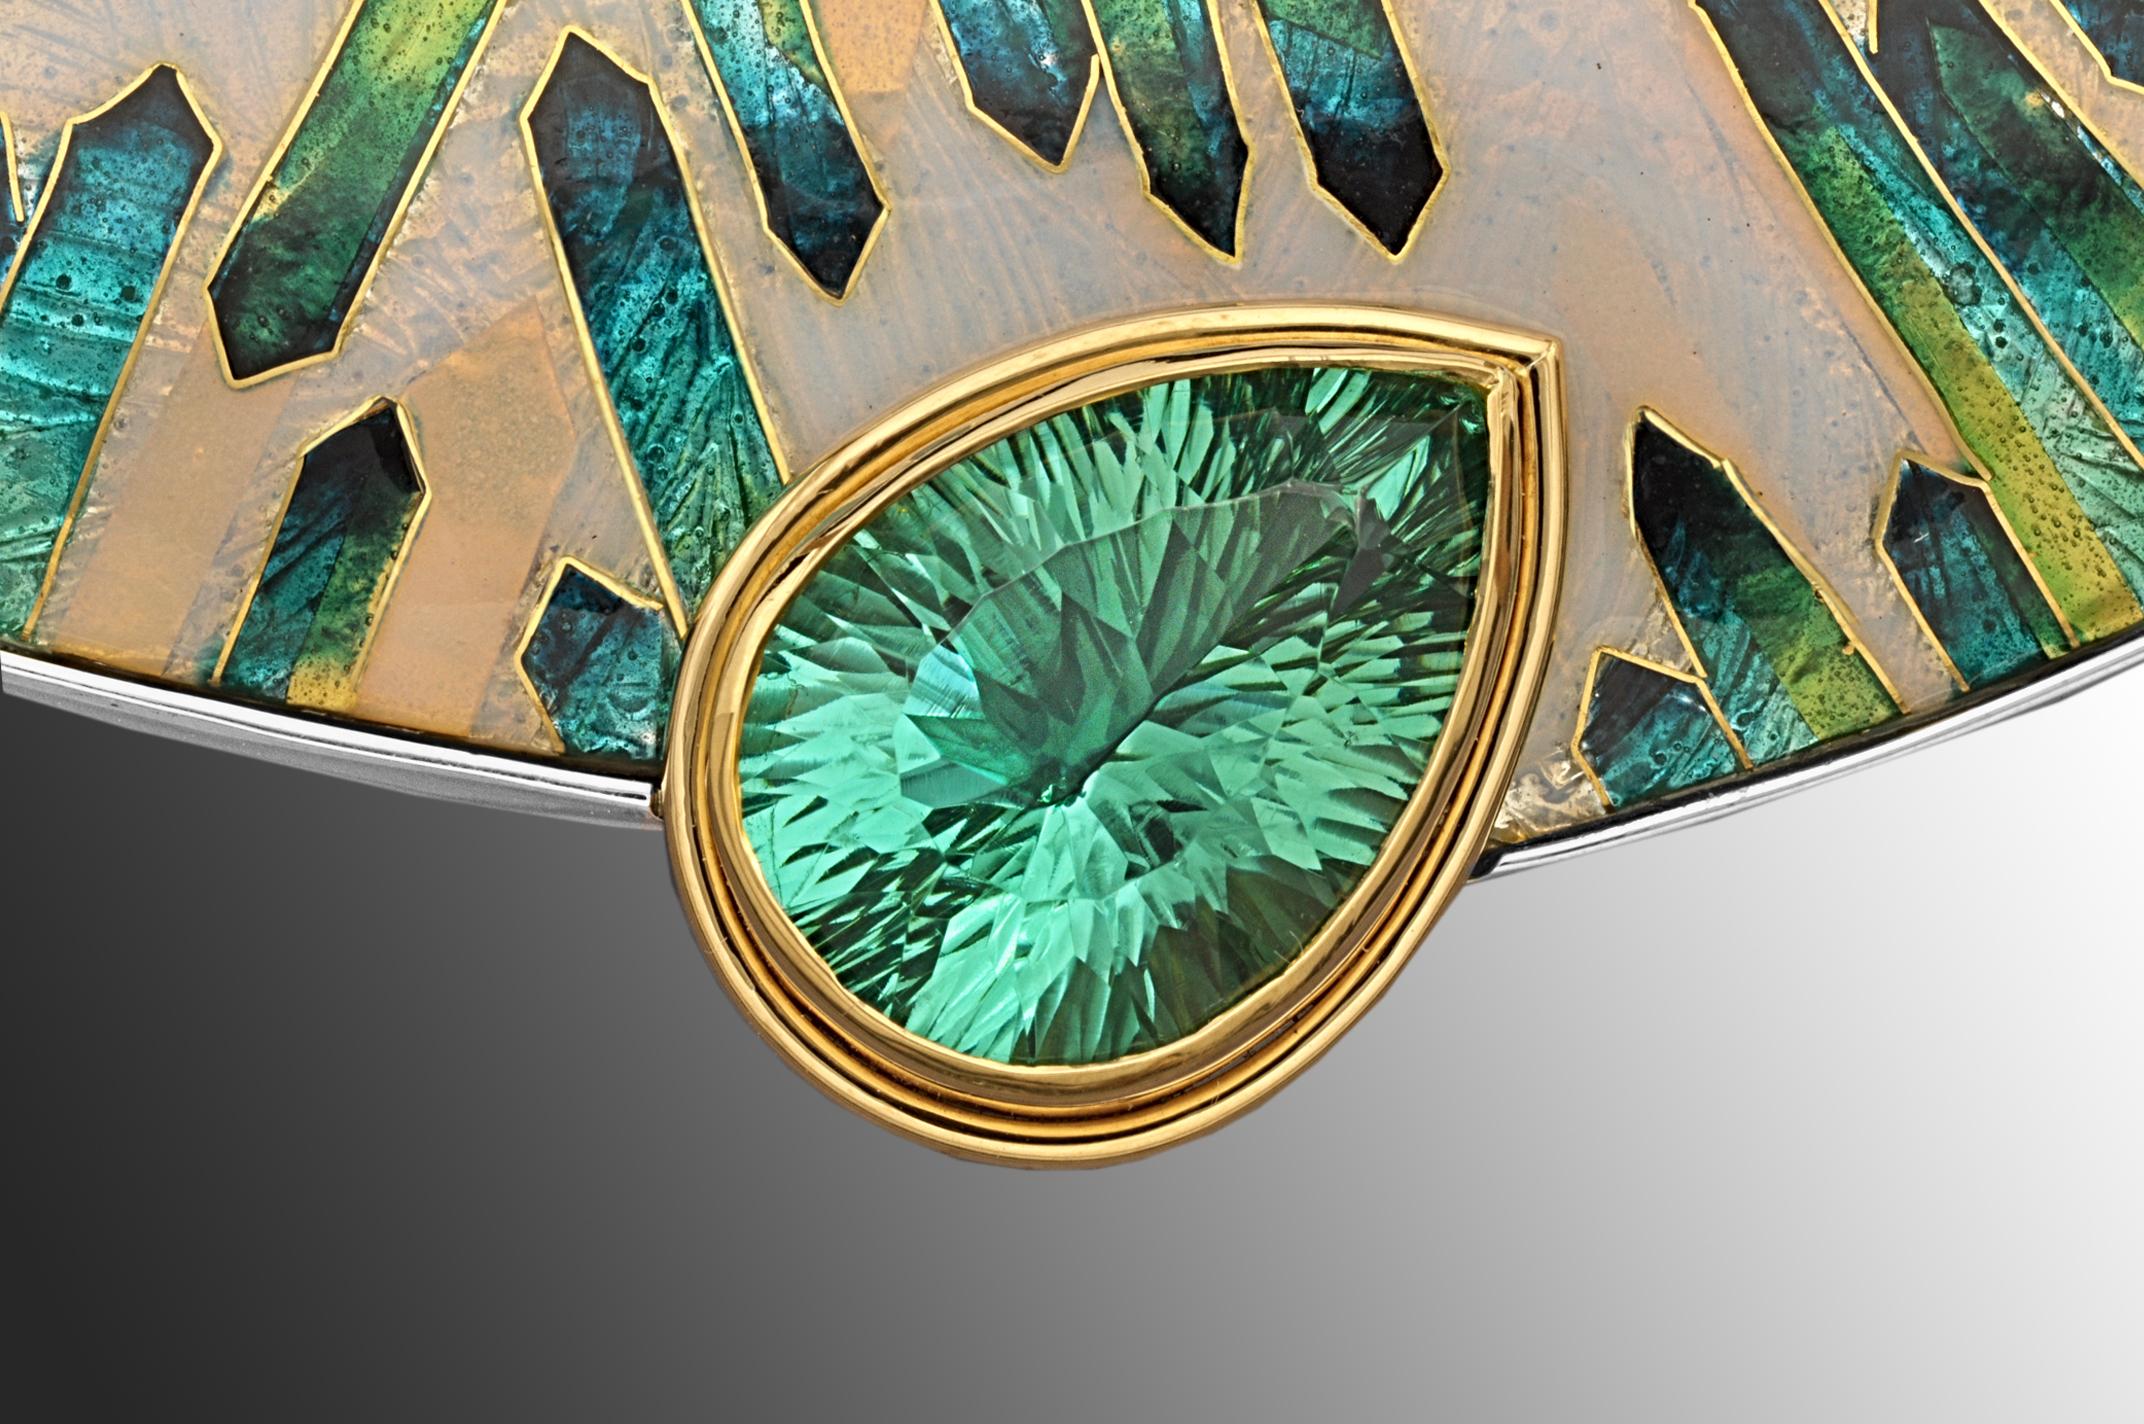 The asymmetric cloisonné enamel brooch is a one of a kind brooch and is named VERDANT. It is inlaid with 24 karat yellow gold. The enamel is bezel set in sterling silver and the 13.6 carat Appetite stone set in 18 karat yellow gold. This statement